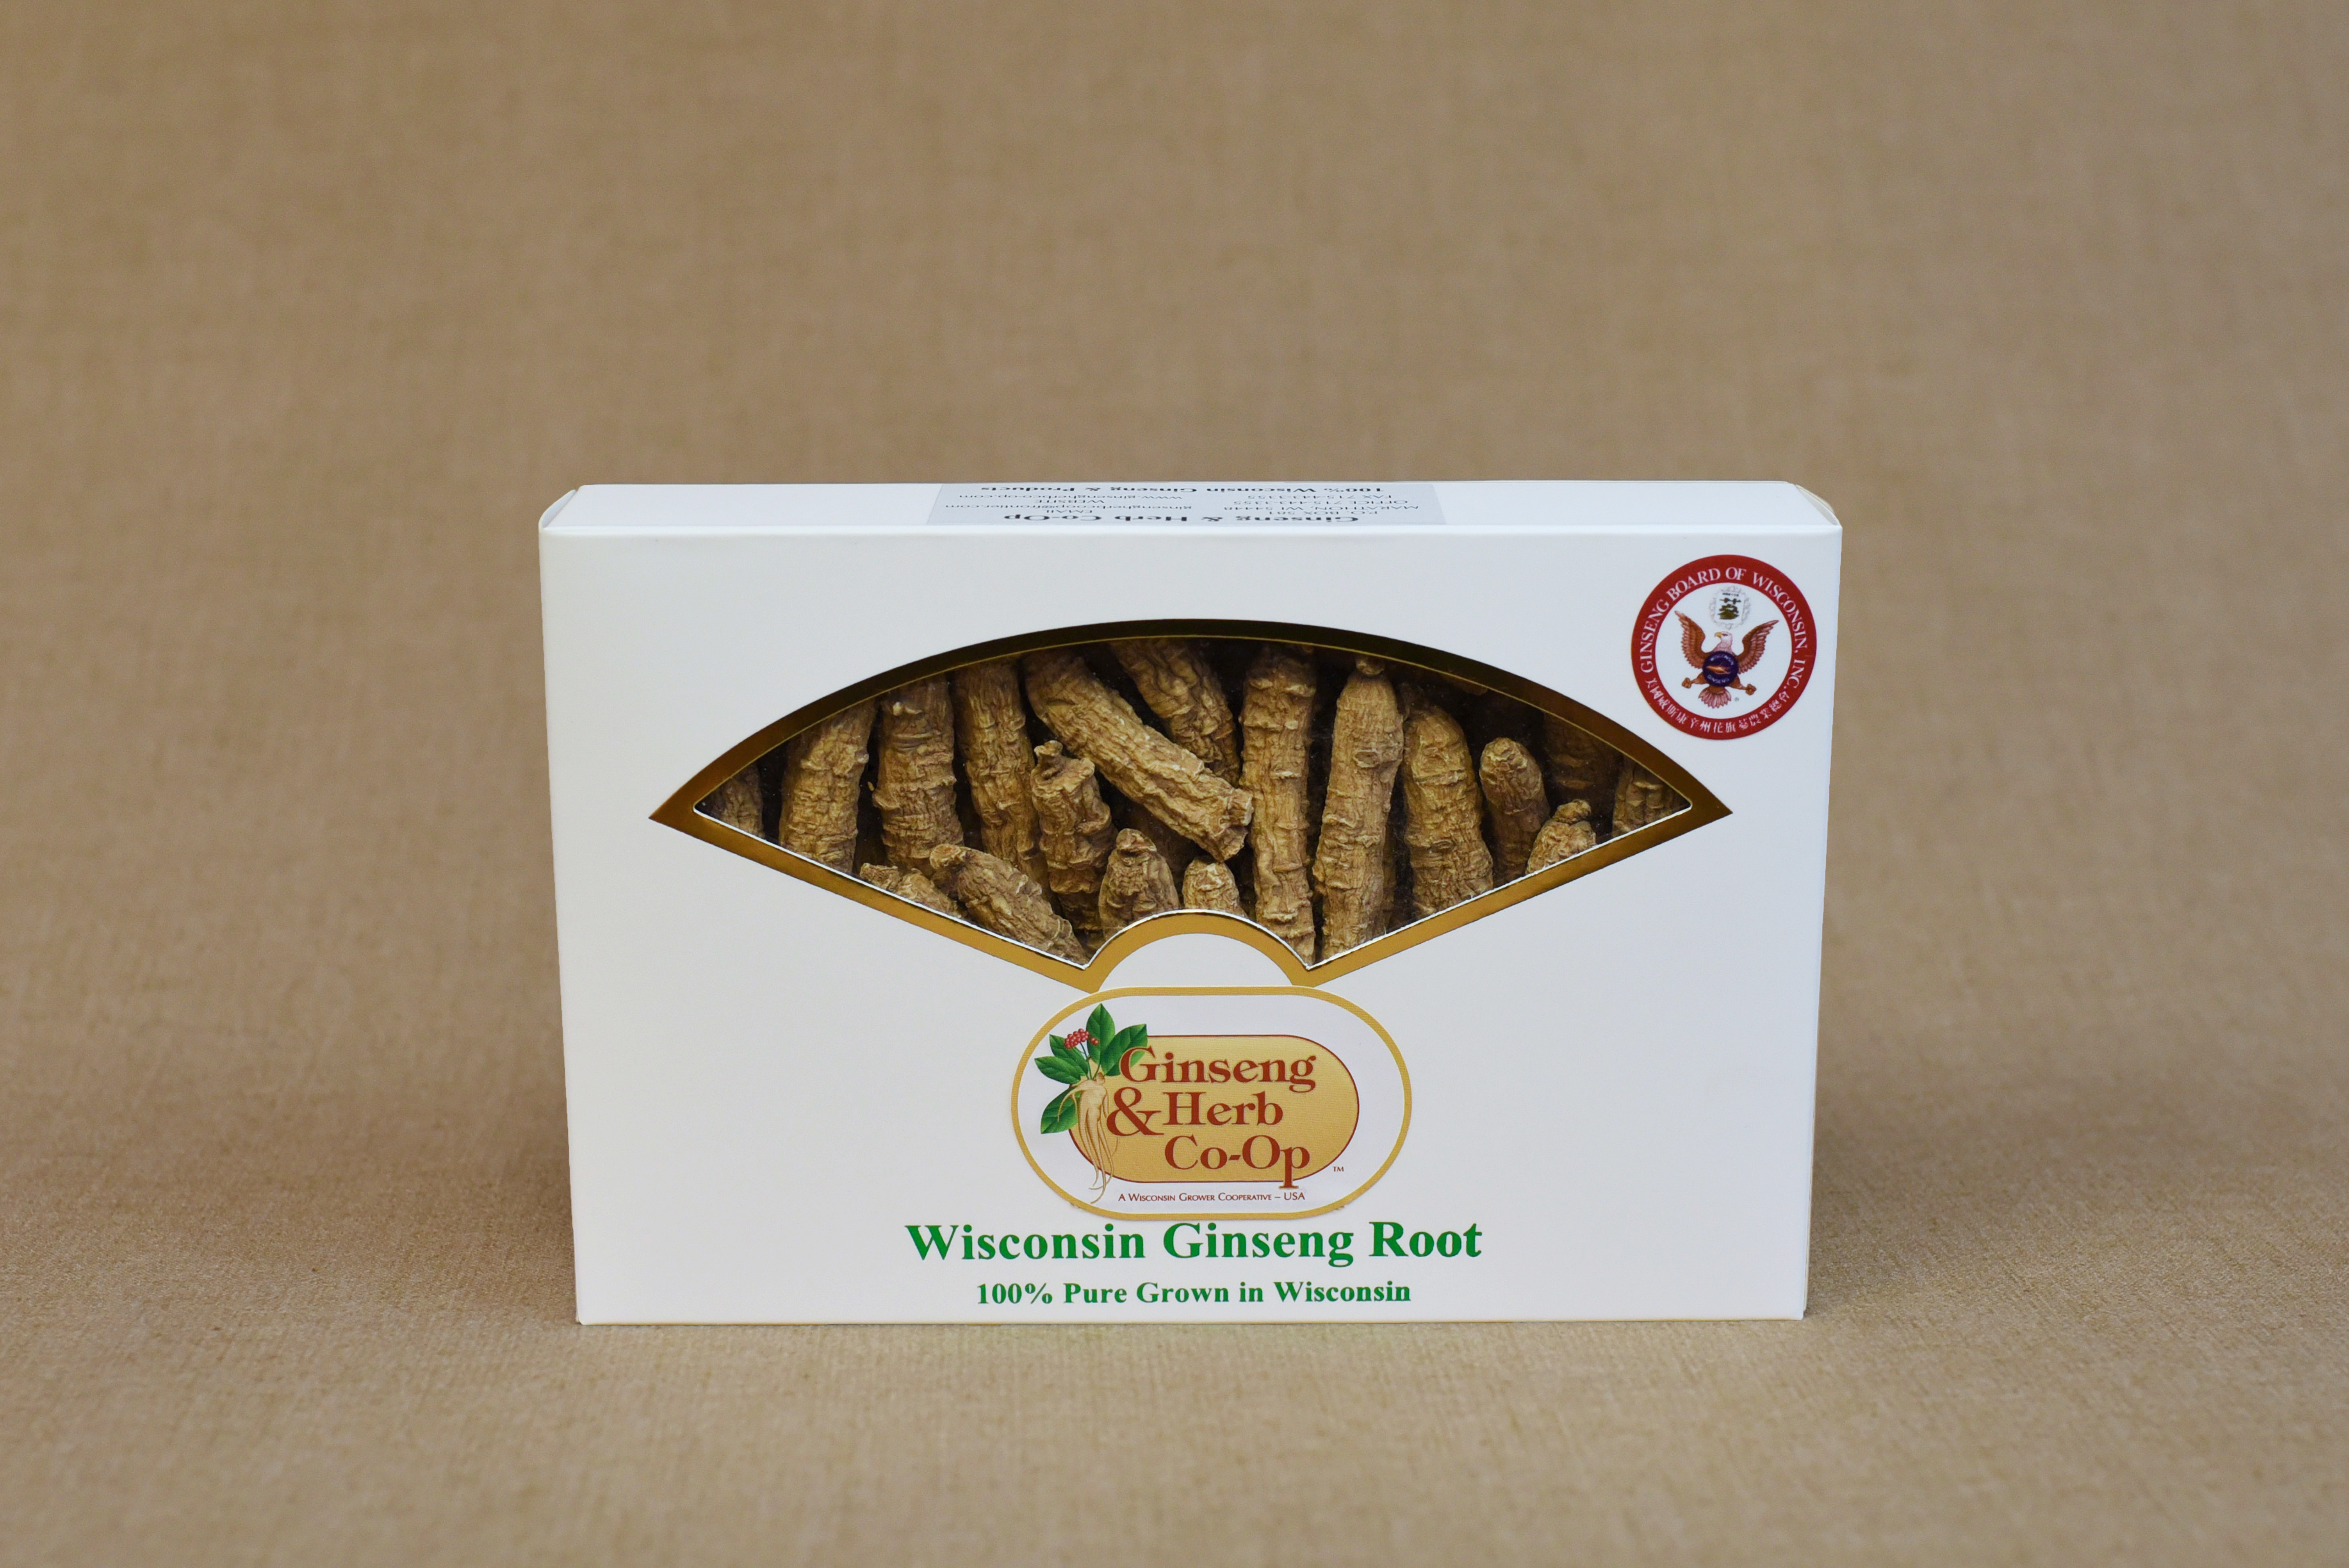 Buy Now! Get high quality Wisconsin Ginseng roots